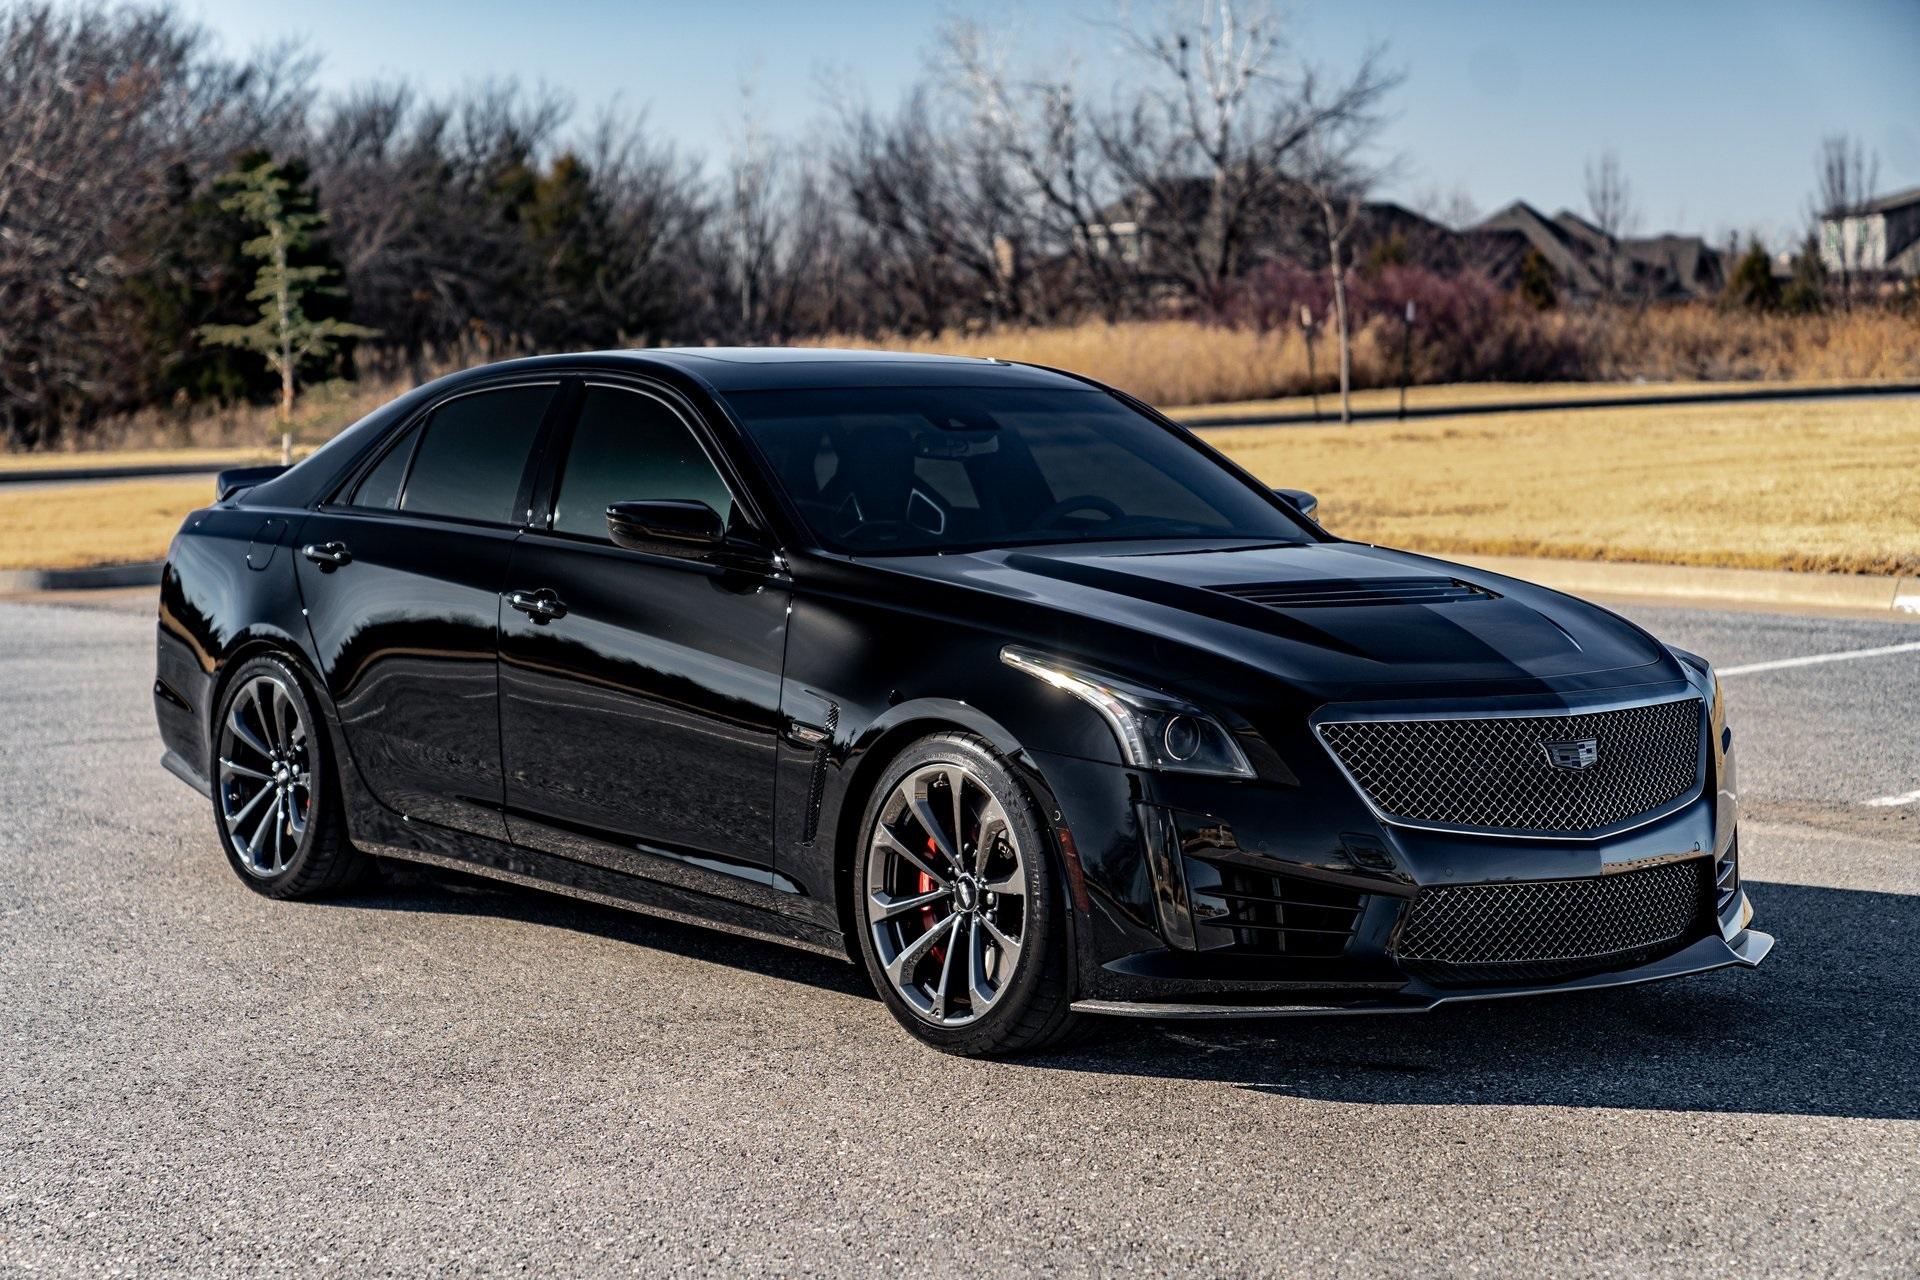 Used 2018 Cadillac Cts V Championship Edition For Sale Sold Exotic Motorsports Of Oklahoma Stock C604